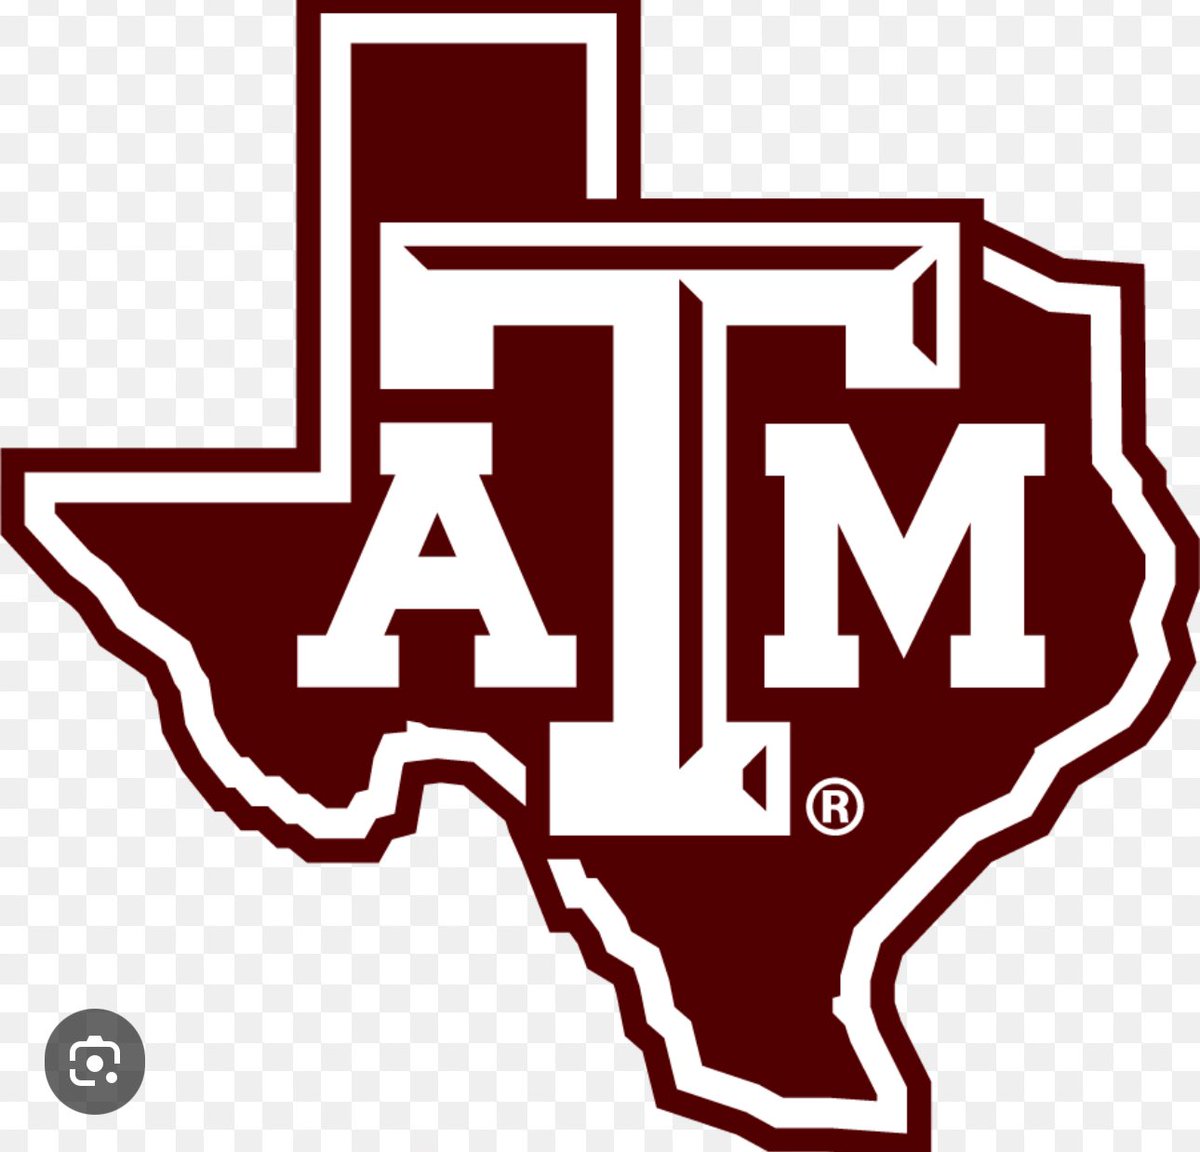 #AGTG after a great visit and conversation with @HolmonWiggins I have earned an offer from @AggieFootball @D_Wren5 @LawrencHopkins @KCHS_Recruit @ScottLashleyPRF